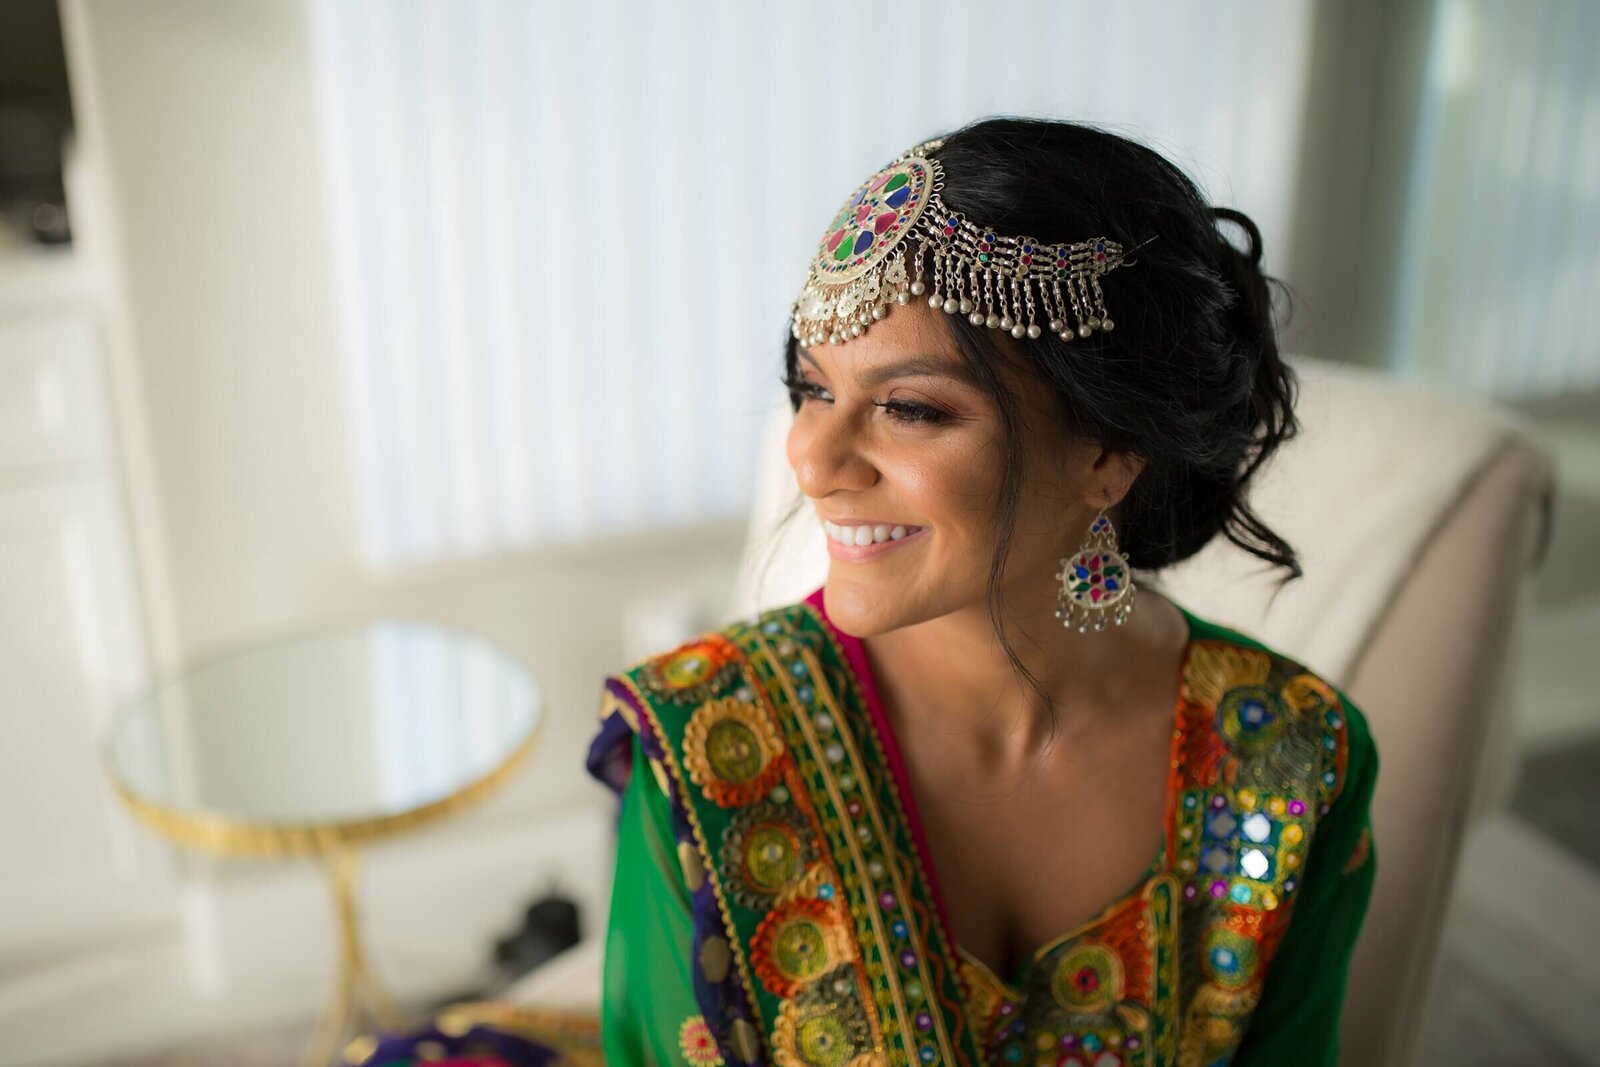 Bride dressed in traditional Afghan attire looks out the window smiling.  Photographed by wedding photographer in Sacramento, philippe studio pro.